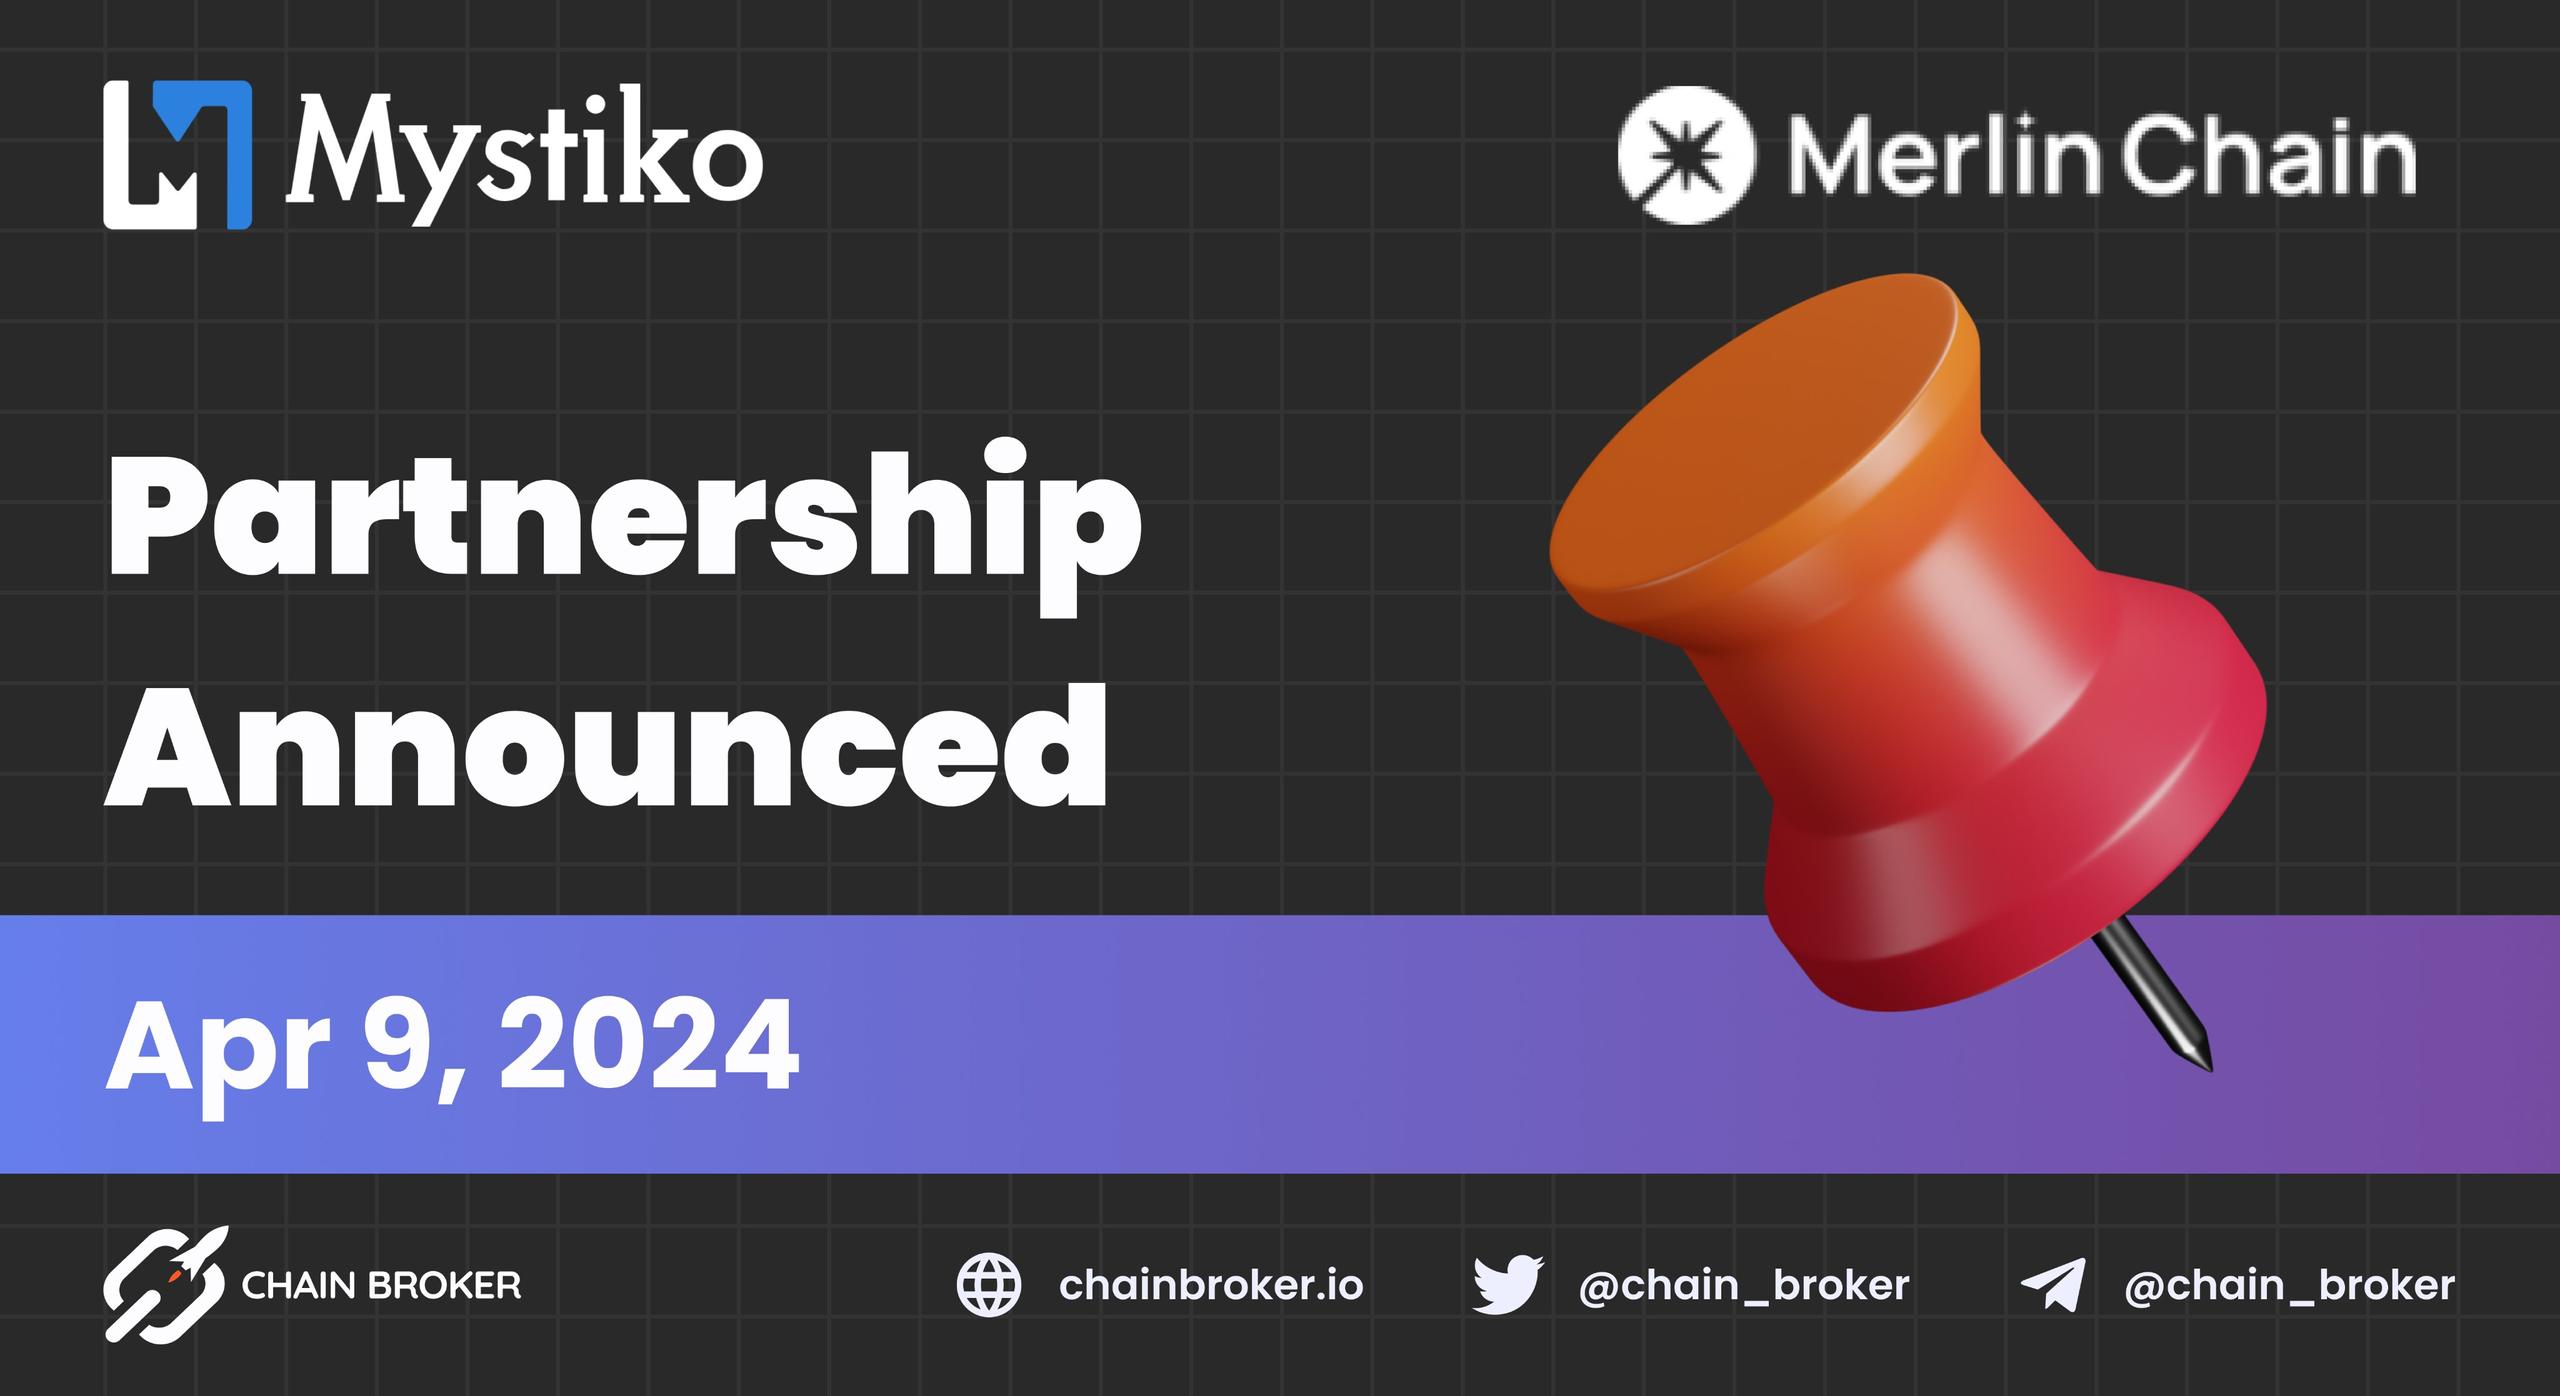 Mystiko.Network announces partnership with Merlin Chain